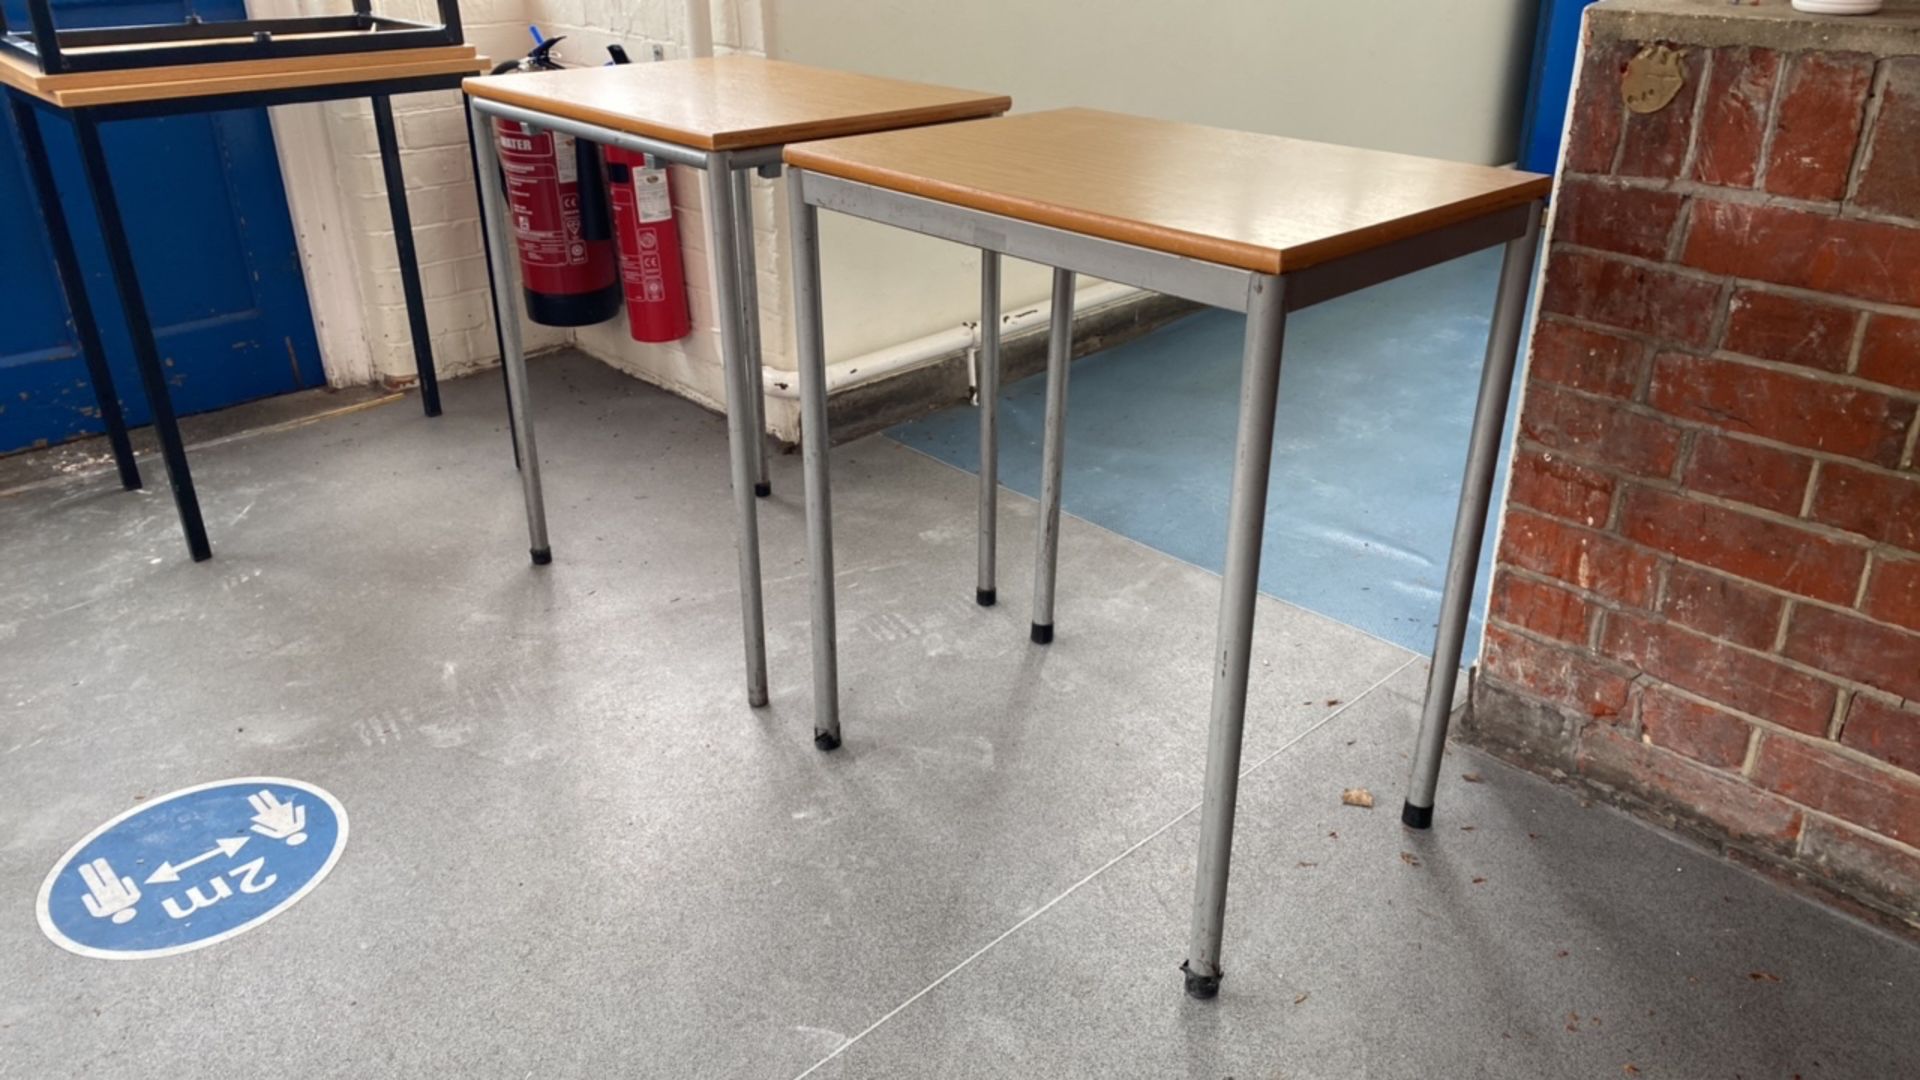 Set of 4 Silver Framed Exam Tables - Image 3 of 6